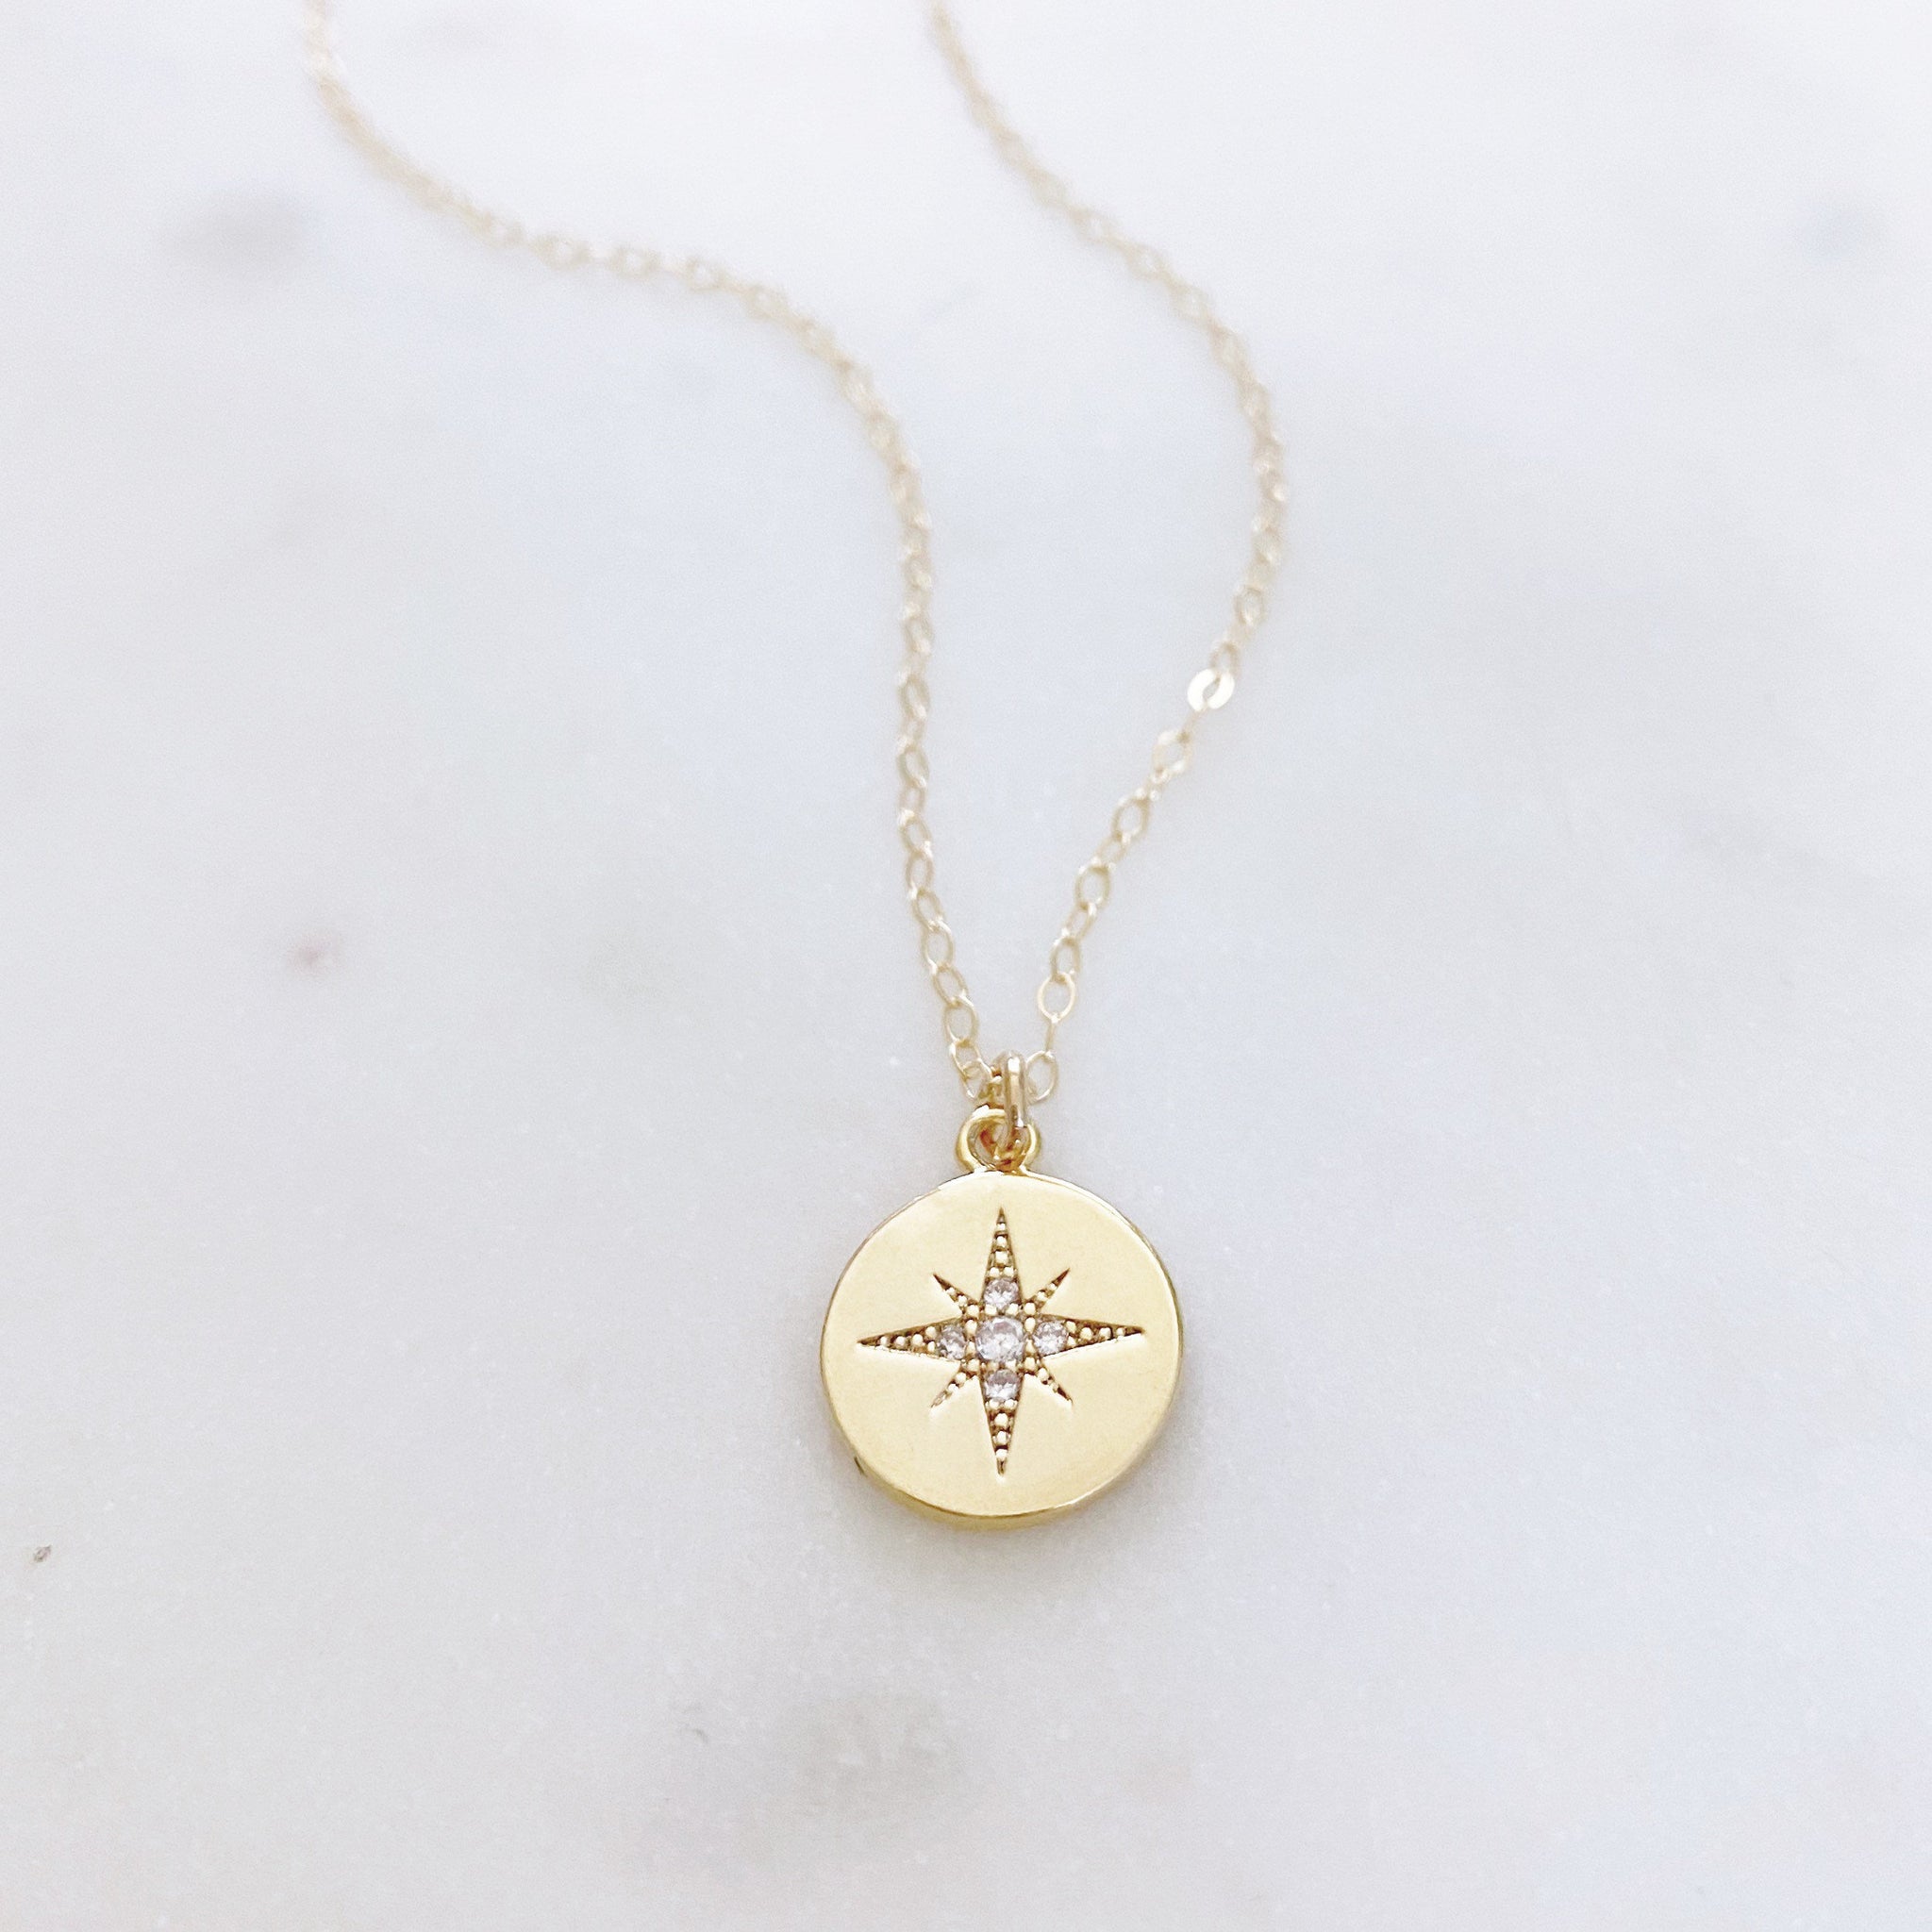 Gold Disc Necklace, North Star Necklace, Coin Necklace, Birthday Gifts for Her, Best Friend Gifts, ALIYA